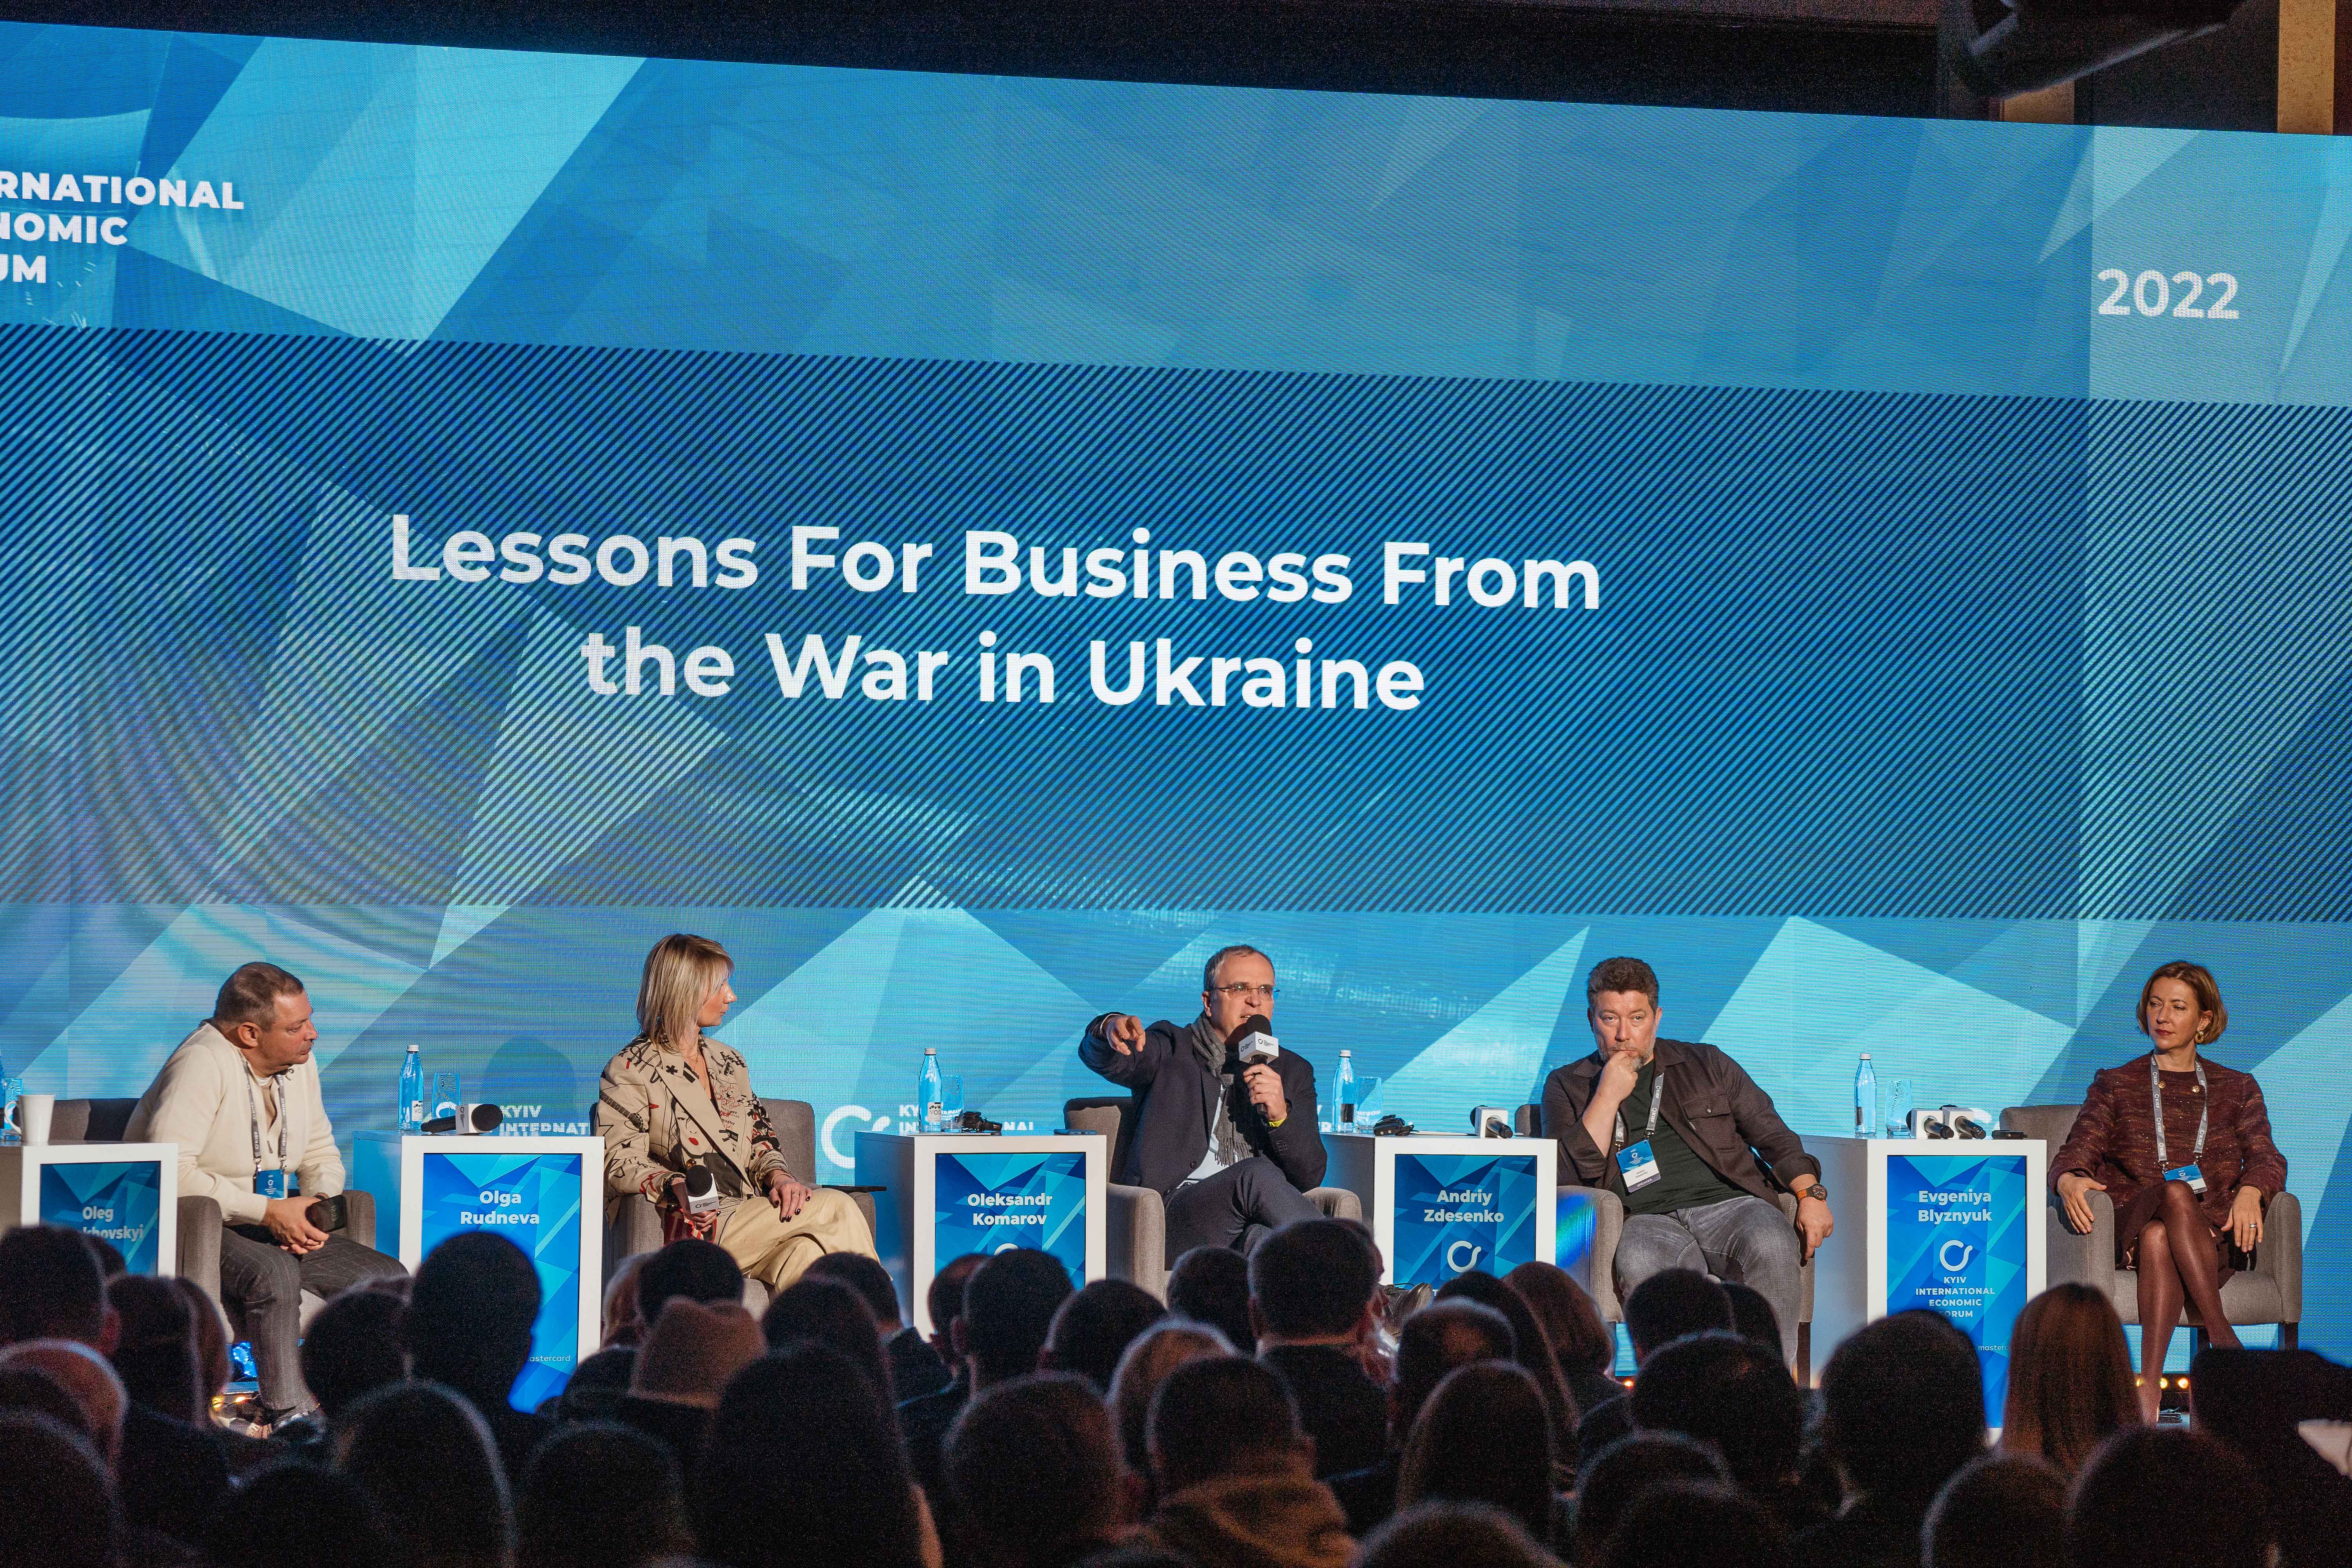 Lessons For Business From the War in Ukraine KIEF 2022